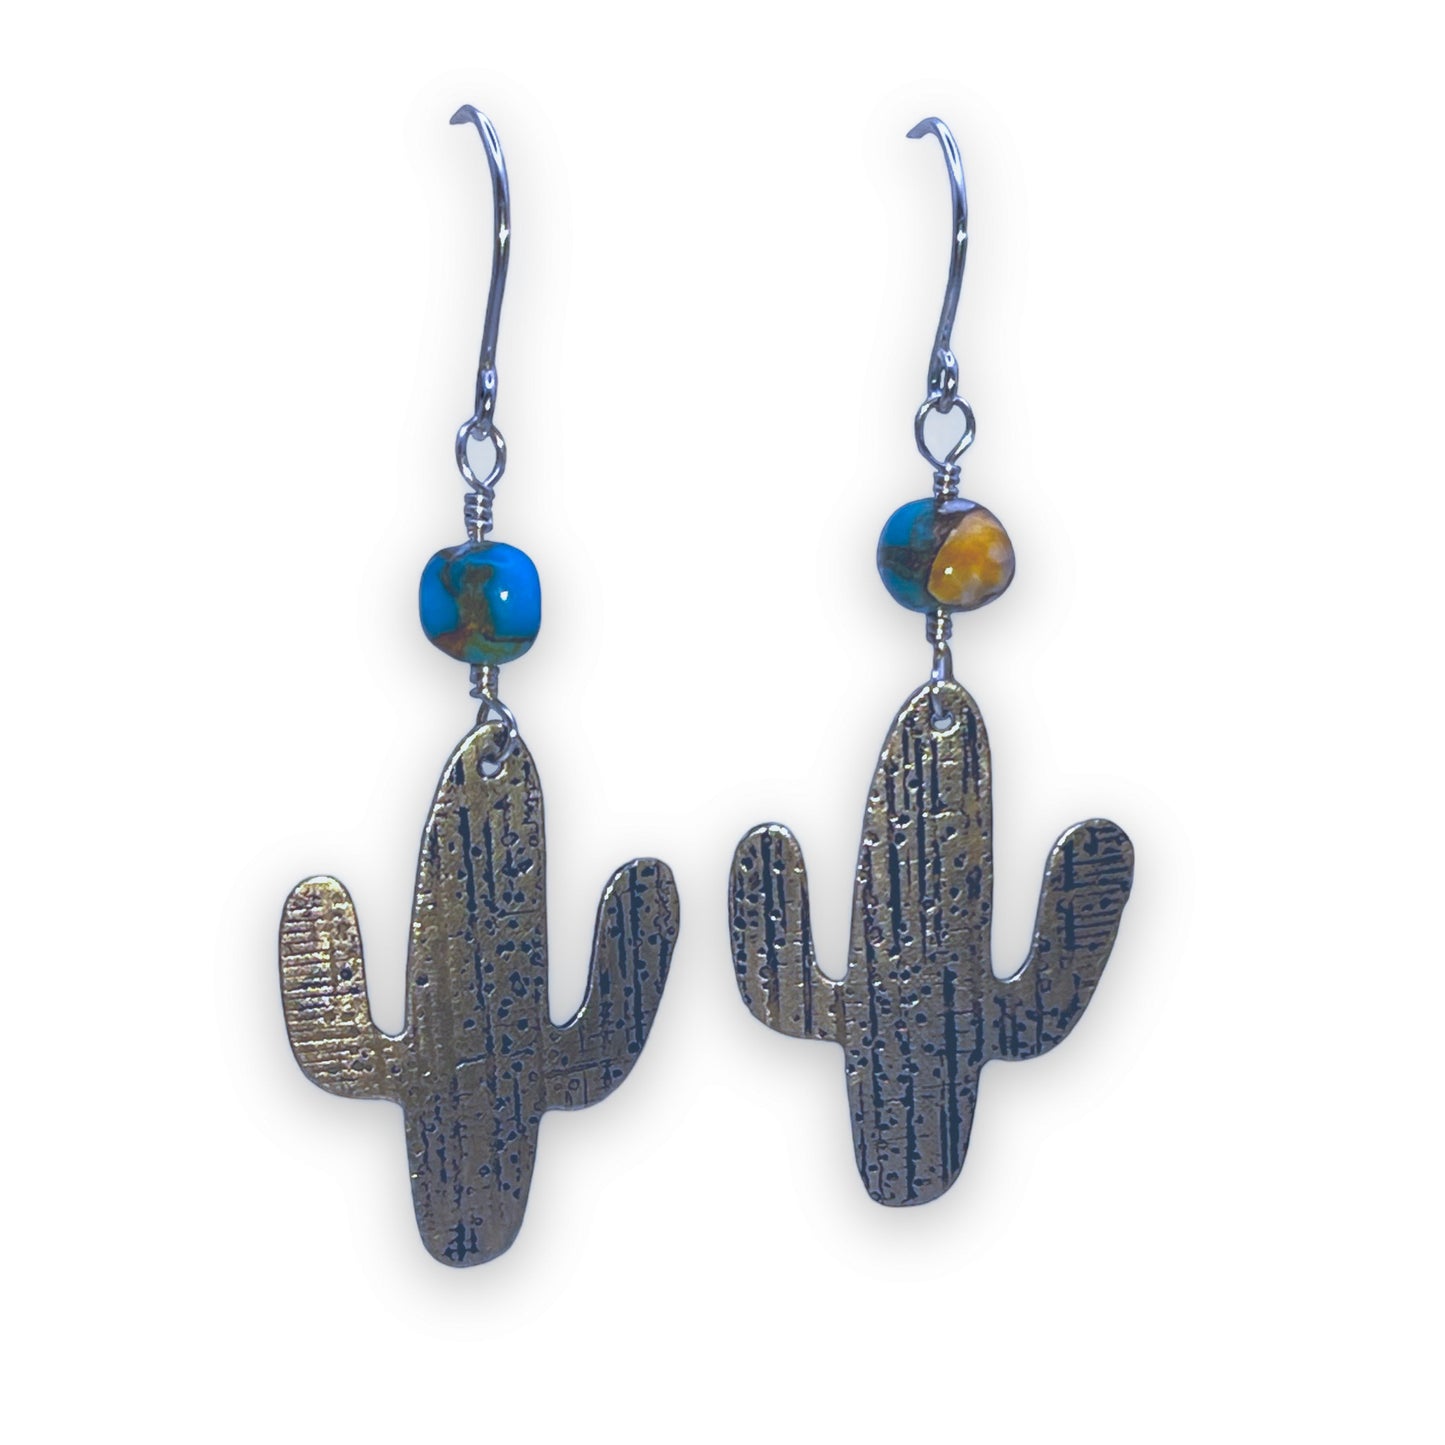 Silver Saguaro cactus and Turquoise earrings